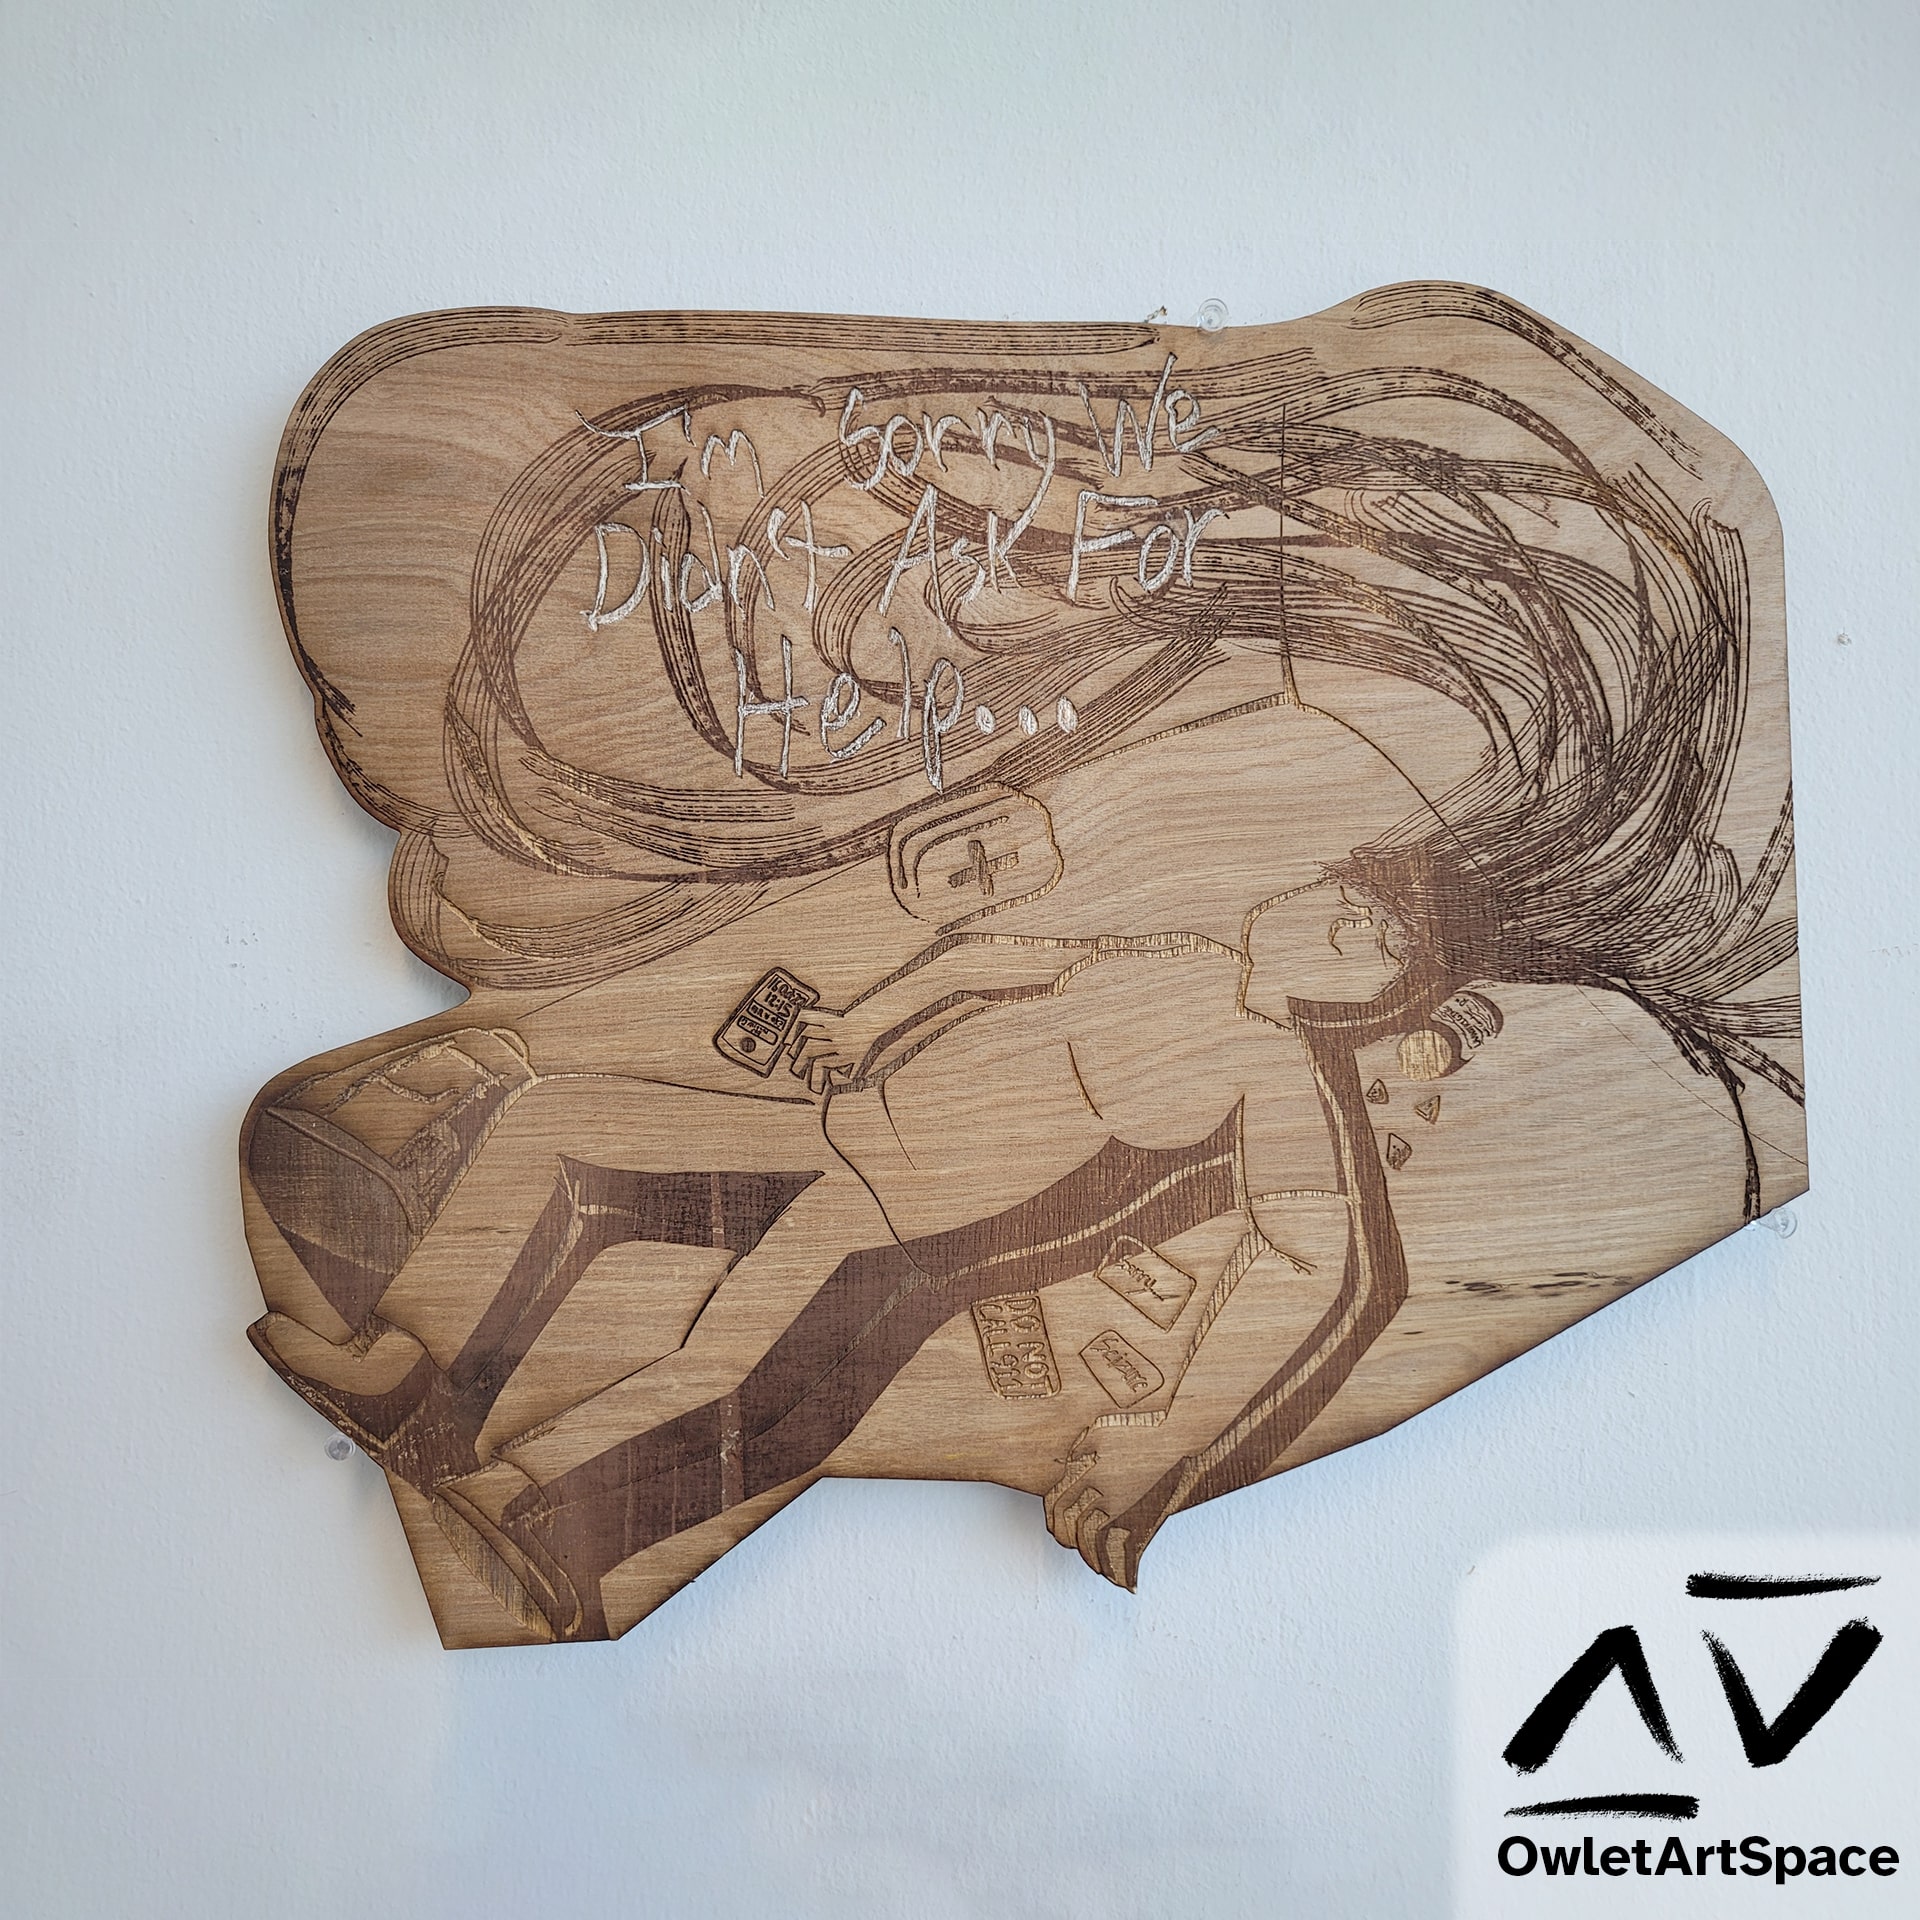 The "I'm sorry we didn't ask for help" artwork but as a laser engraging onto plywood.